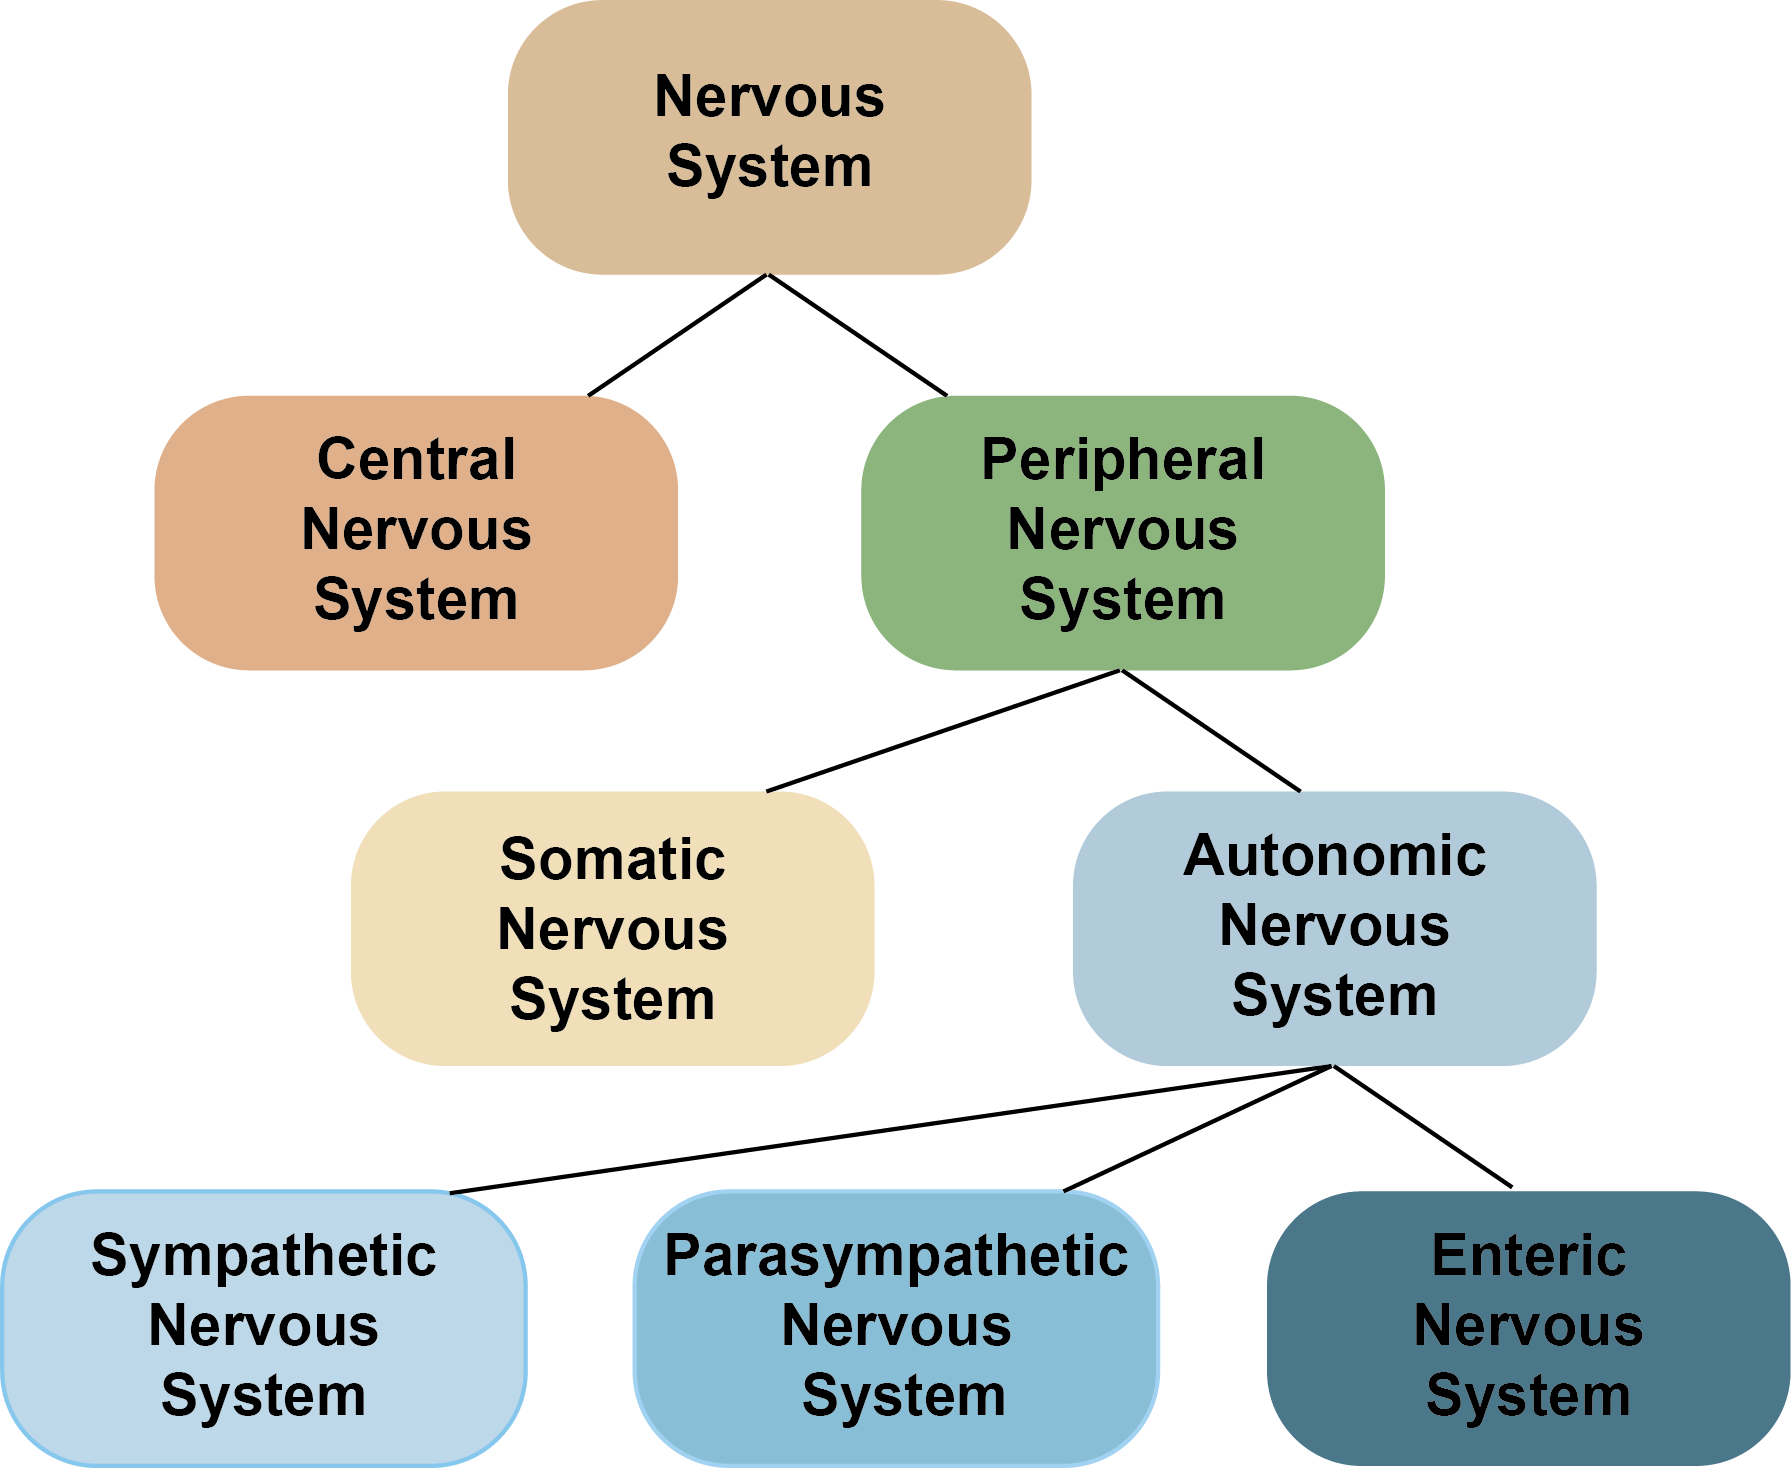 Hierarchical label diagram showing the divisions of the nervous system. The nervous system is at the top, with lines going to the CNS and PNS below. From the PNS are lines to the Somatic nervous system and the Autonomic Nervous system below. Finally on the lowest level are the Sympathetic Nervous system, the Parasympathetic nervous system, and the Enteric Nervous system, with lines connecting them to the ANS on the level above.